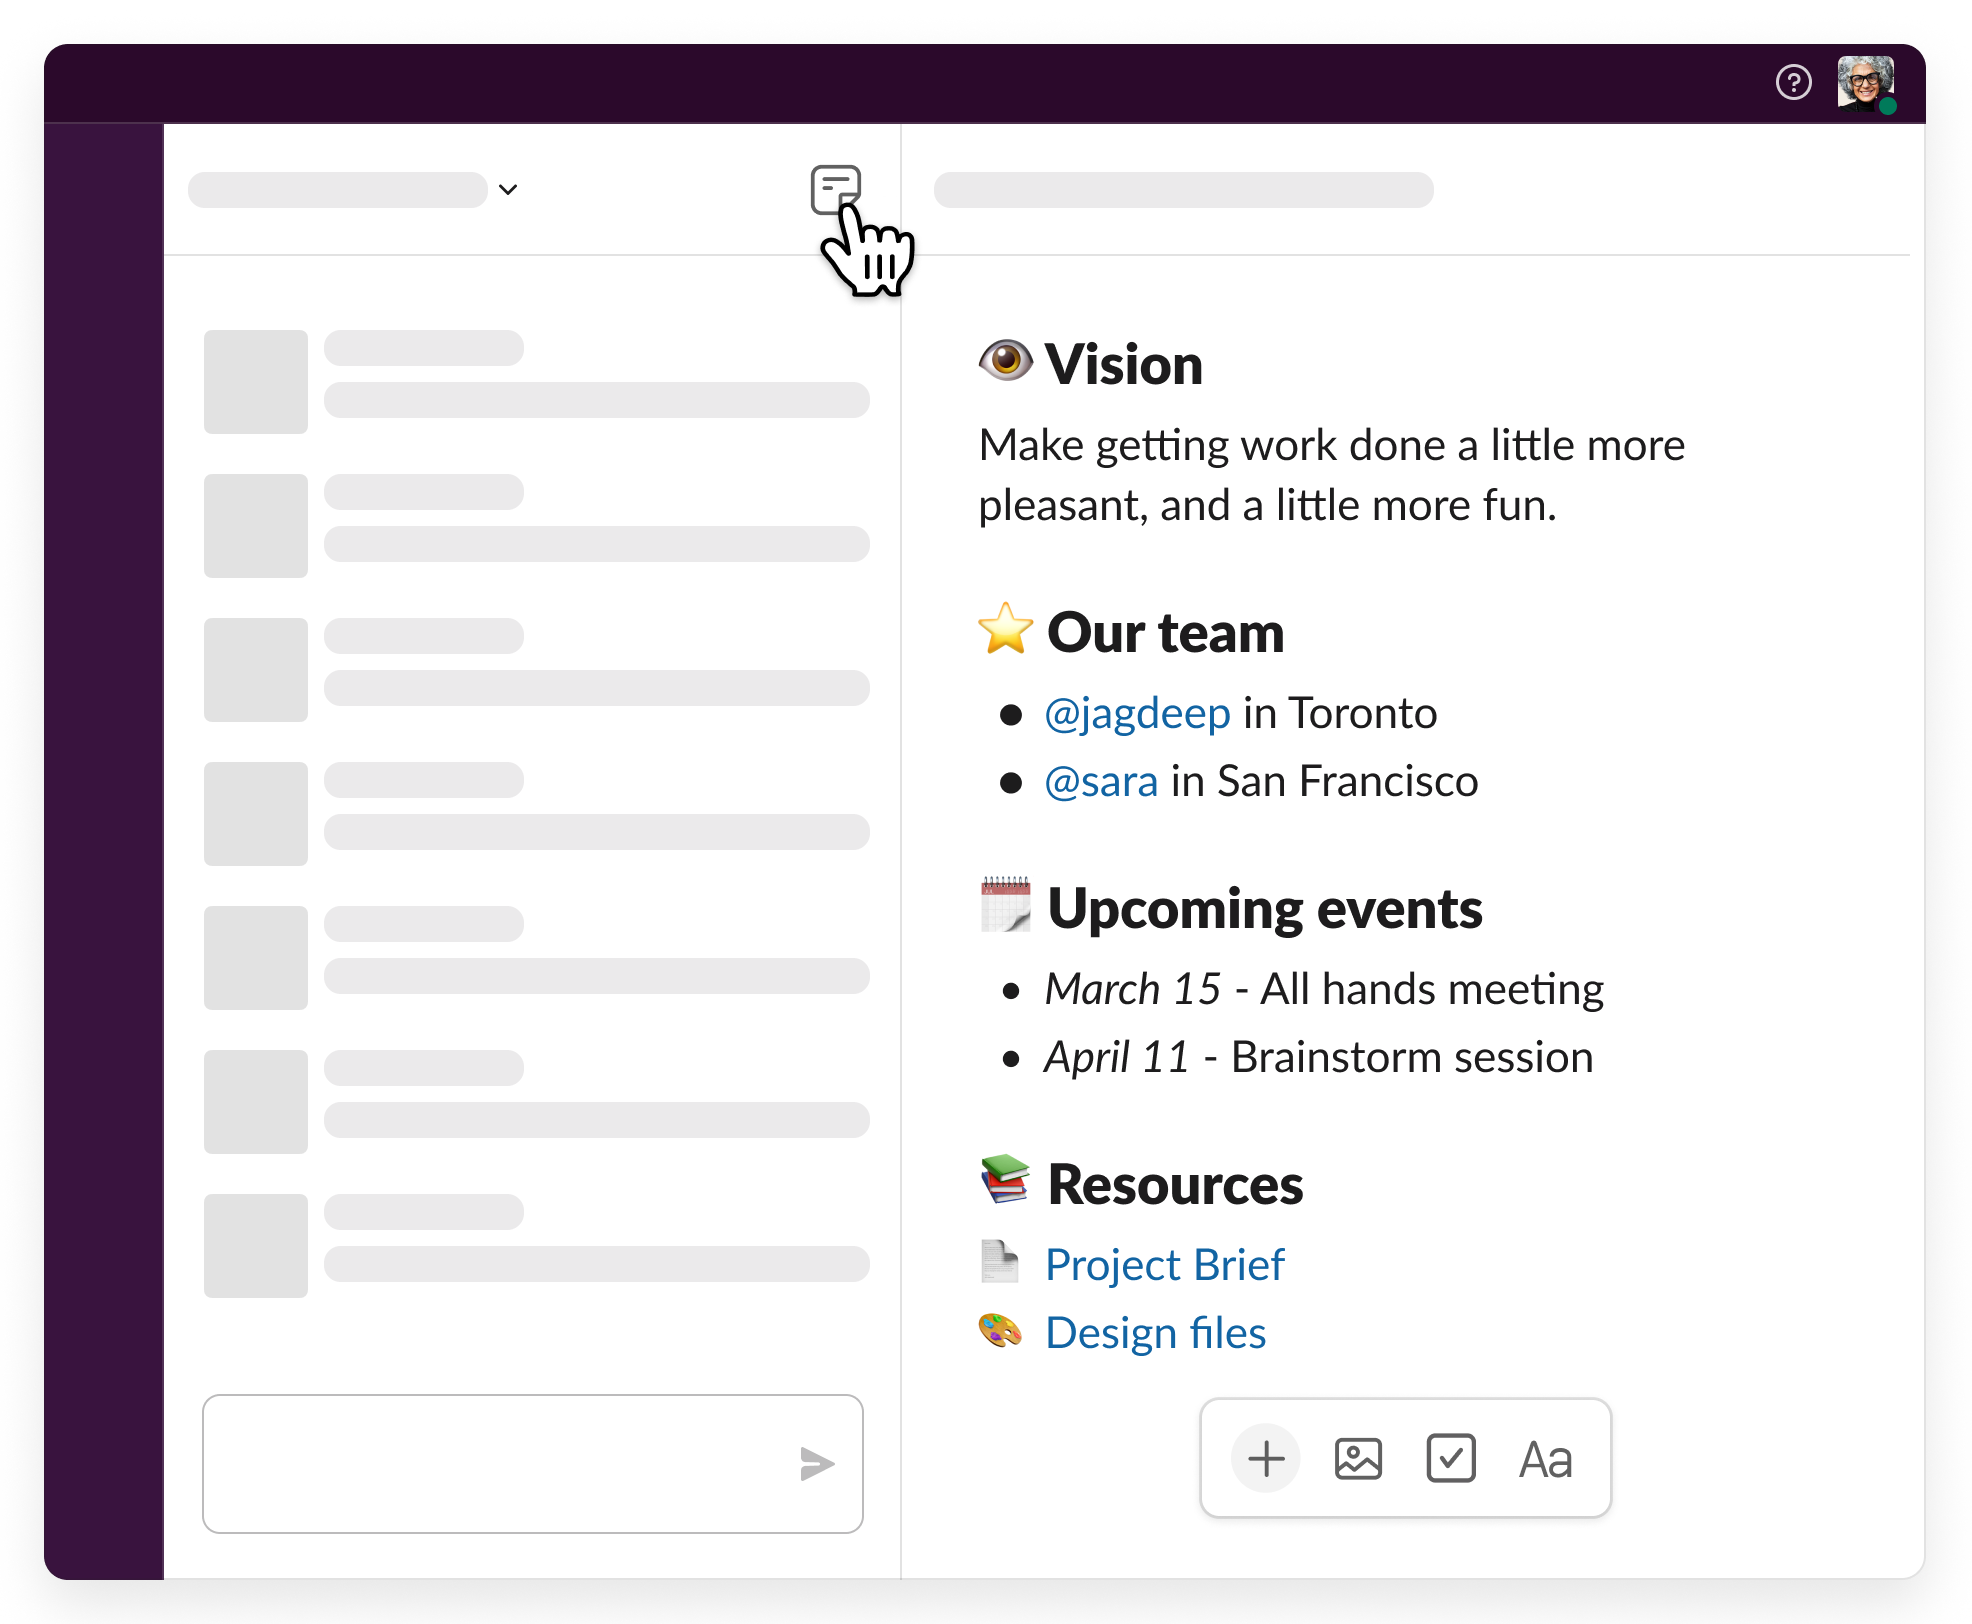 open canvas in a team channel containing key information including vision, list of teammates, upcoming schedule, and important resources